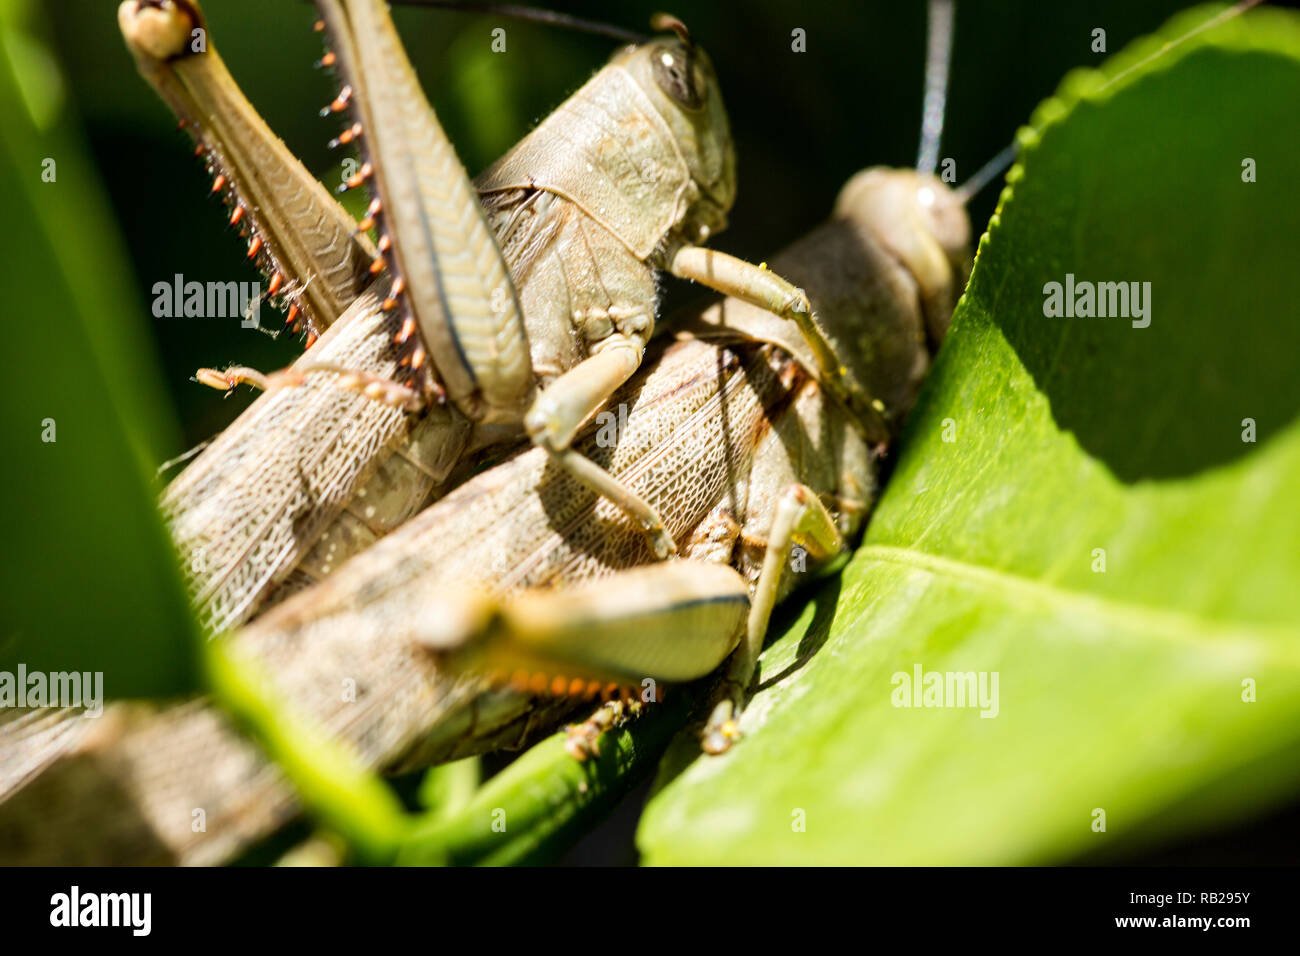 Hedge Grasshoppers, Valanga irregularis, in a mating position. The smaller insect is the male and is on top of the female or the larger insect Stock Photo